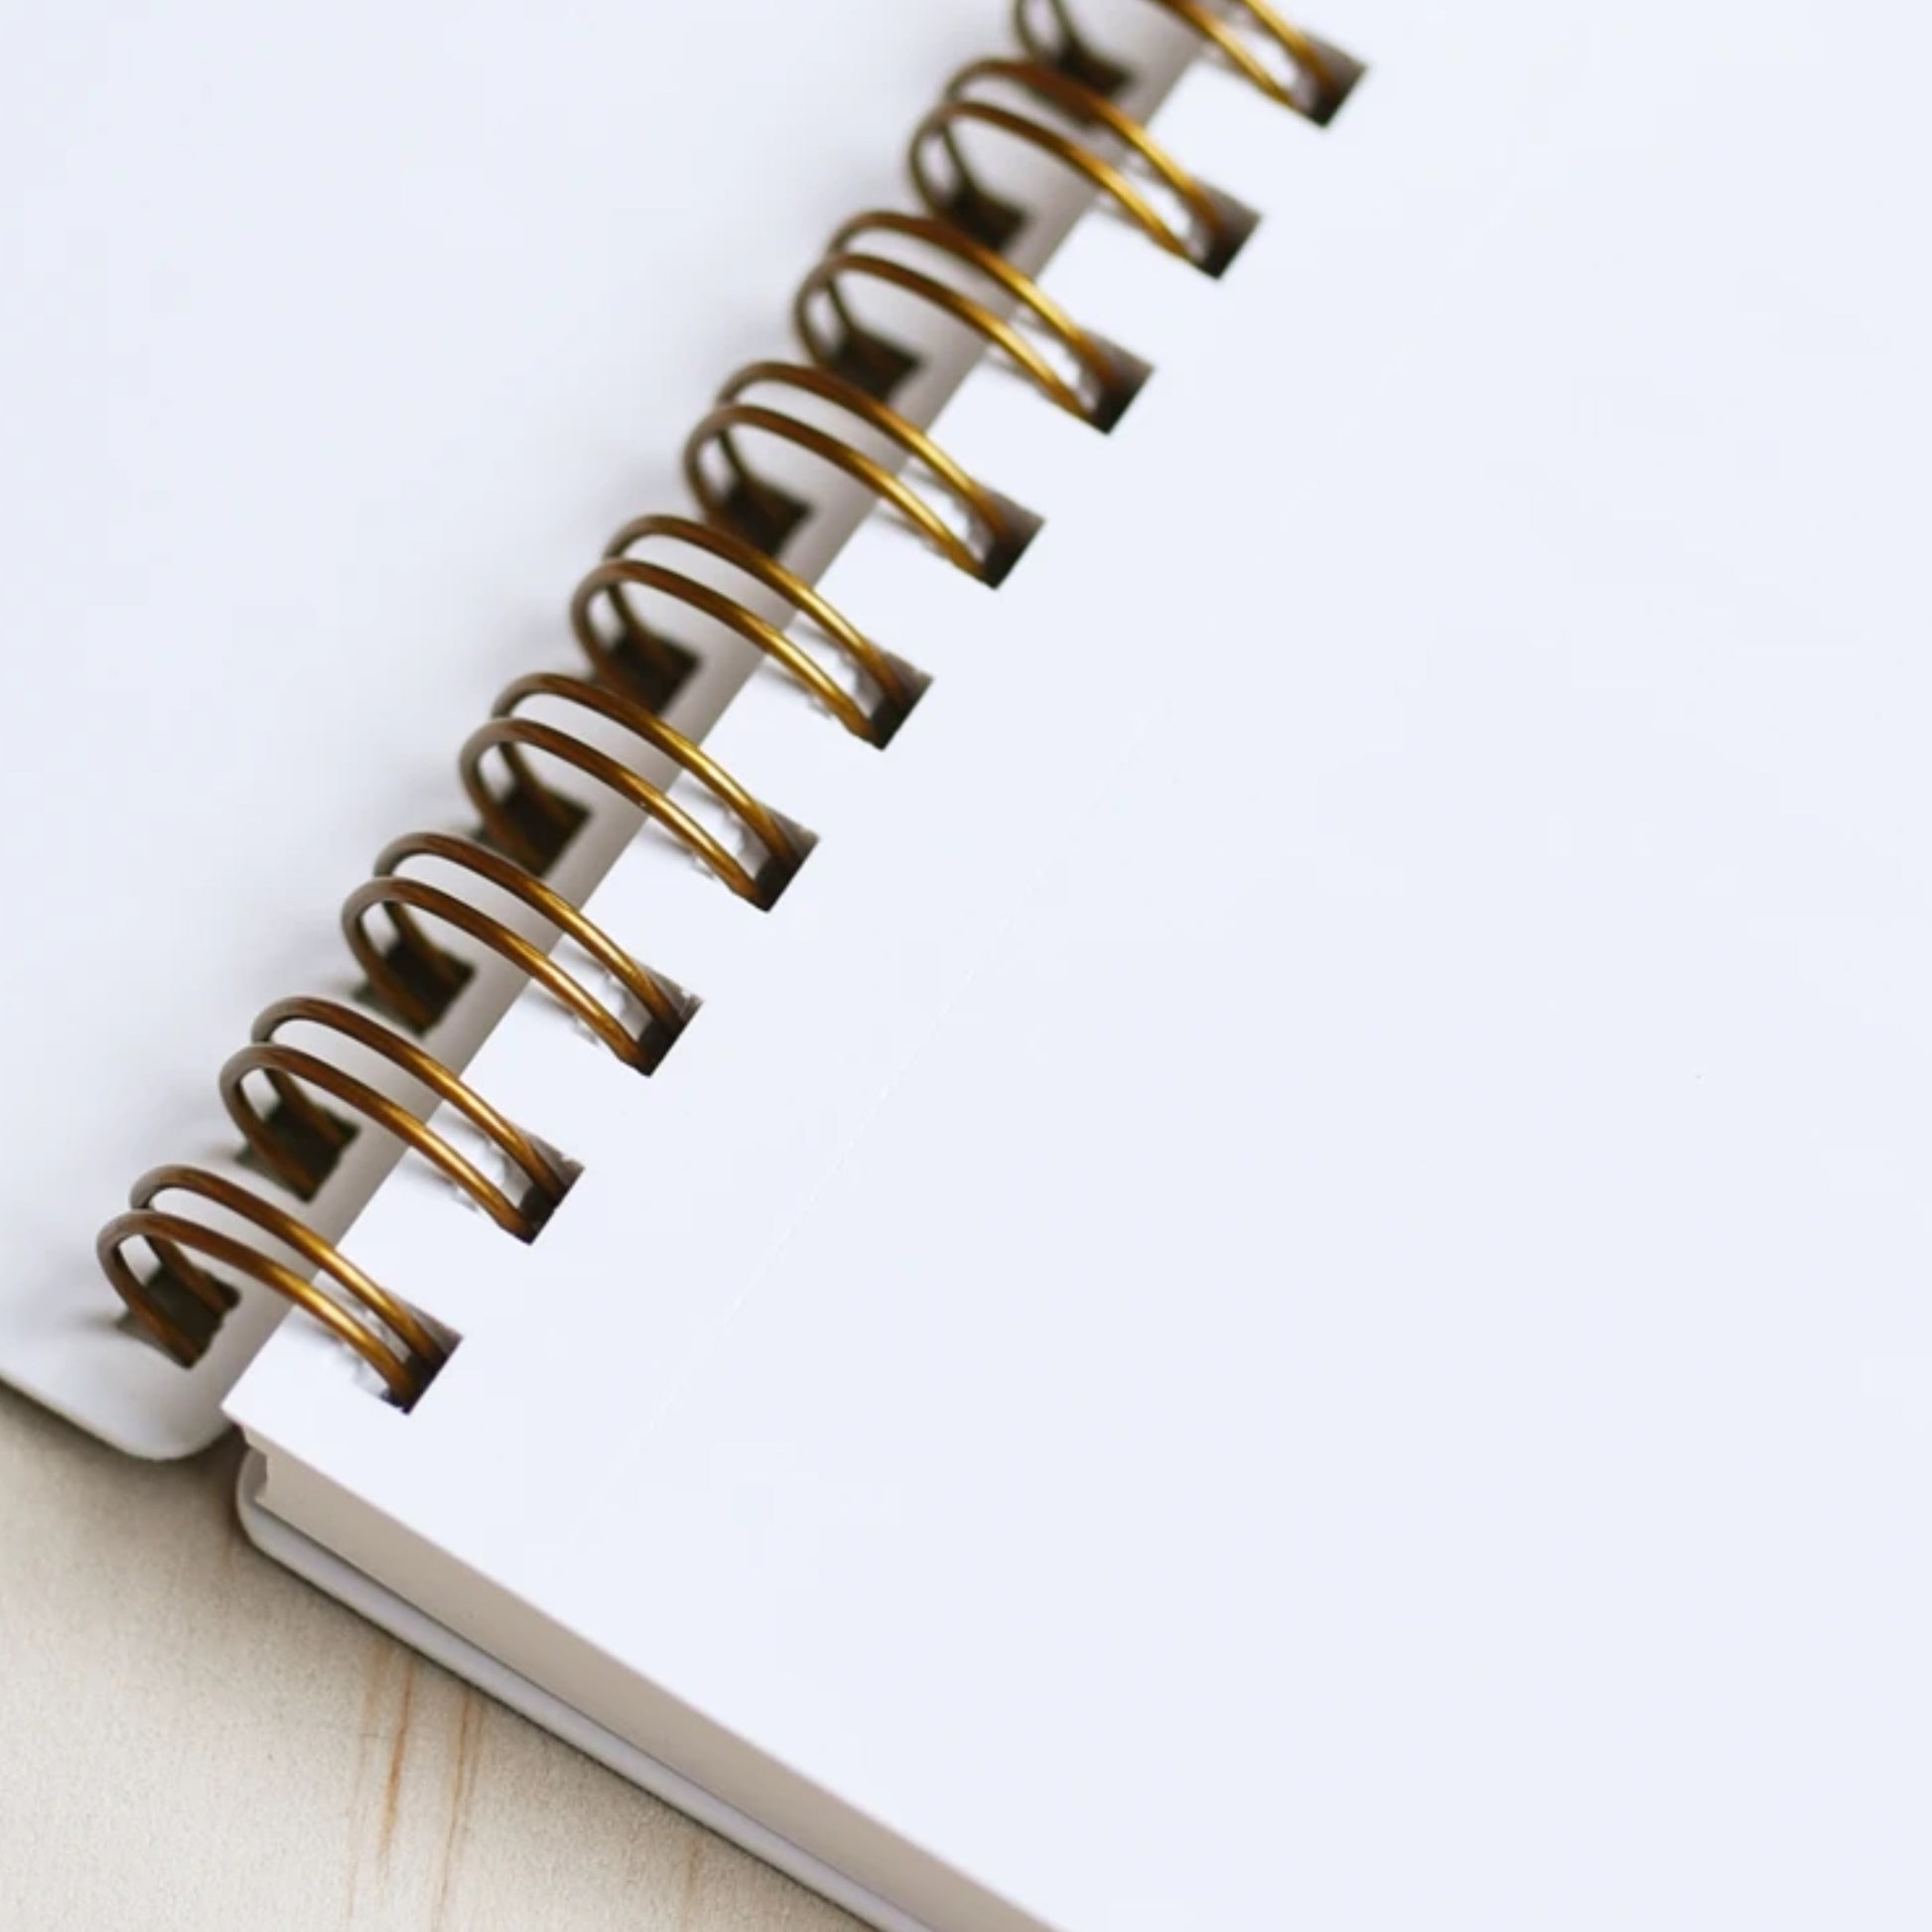 Appointed Blank Page Notebook